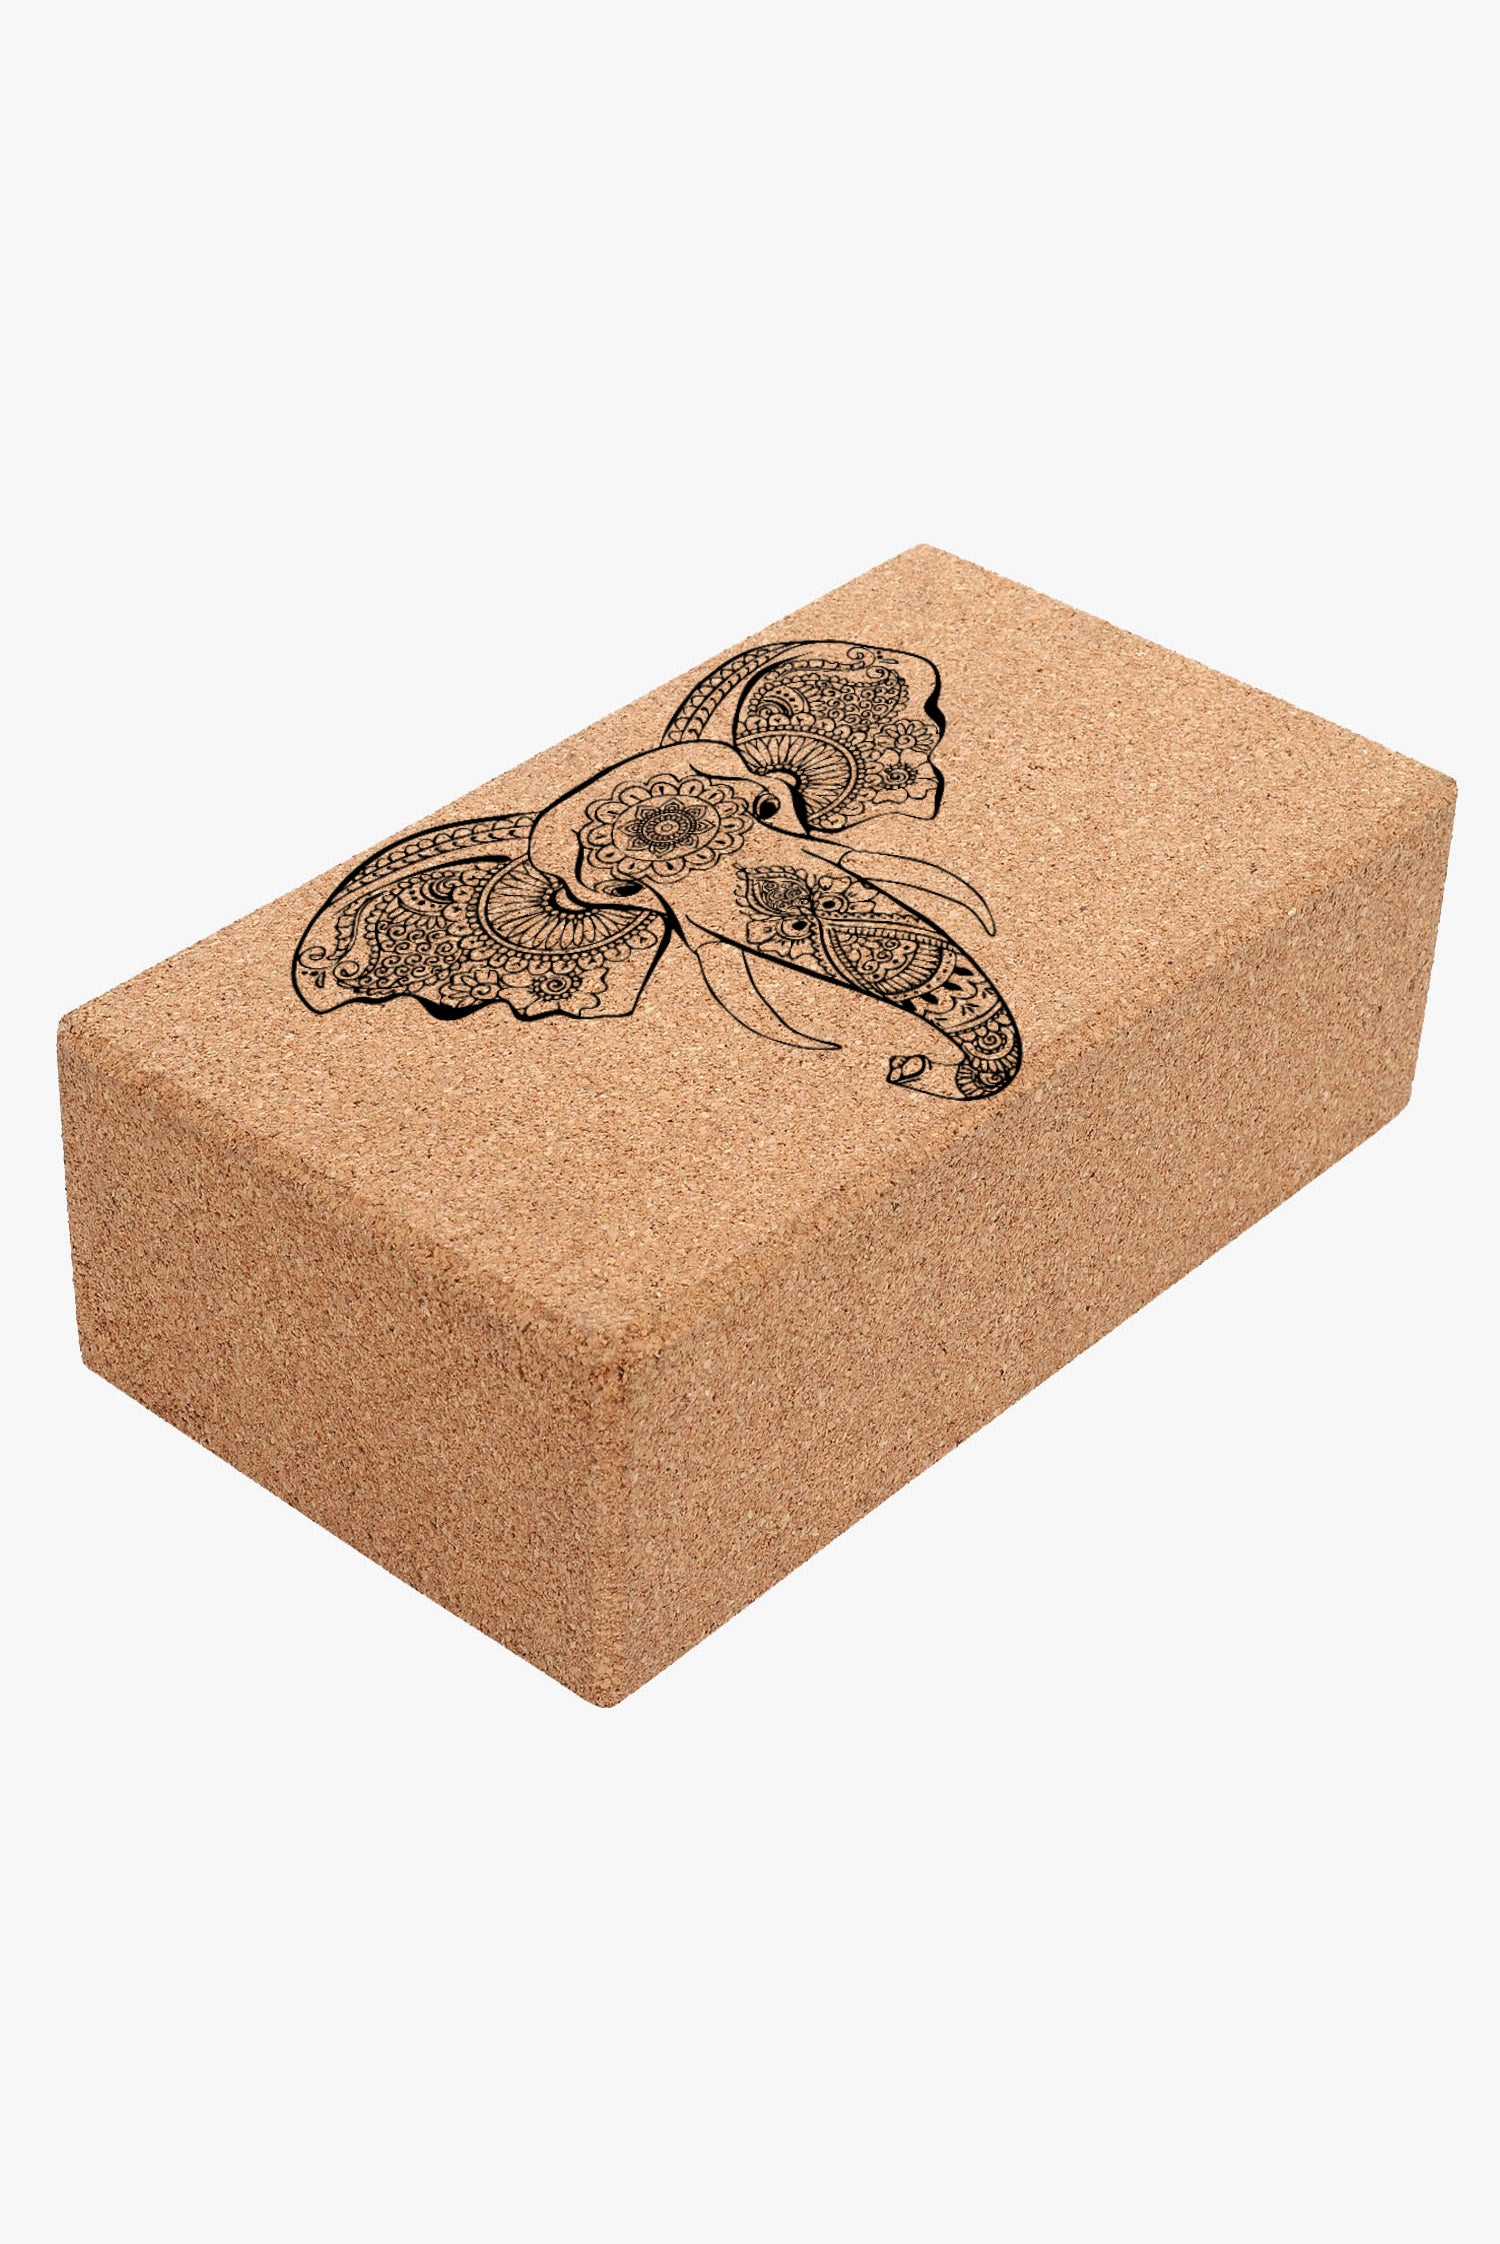 Premium Elephant Design Cork Yoga Block - Sustainable and supportive yoga prop for enhanced poses and practice. Elevate your yoga journey with the best cork blocks